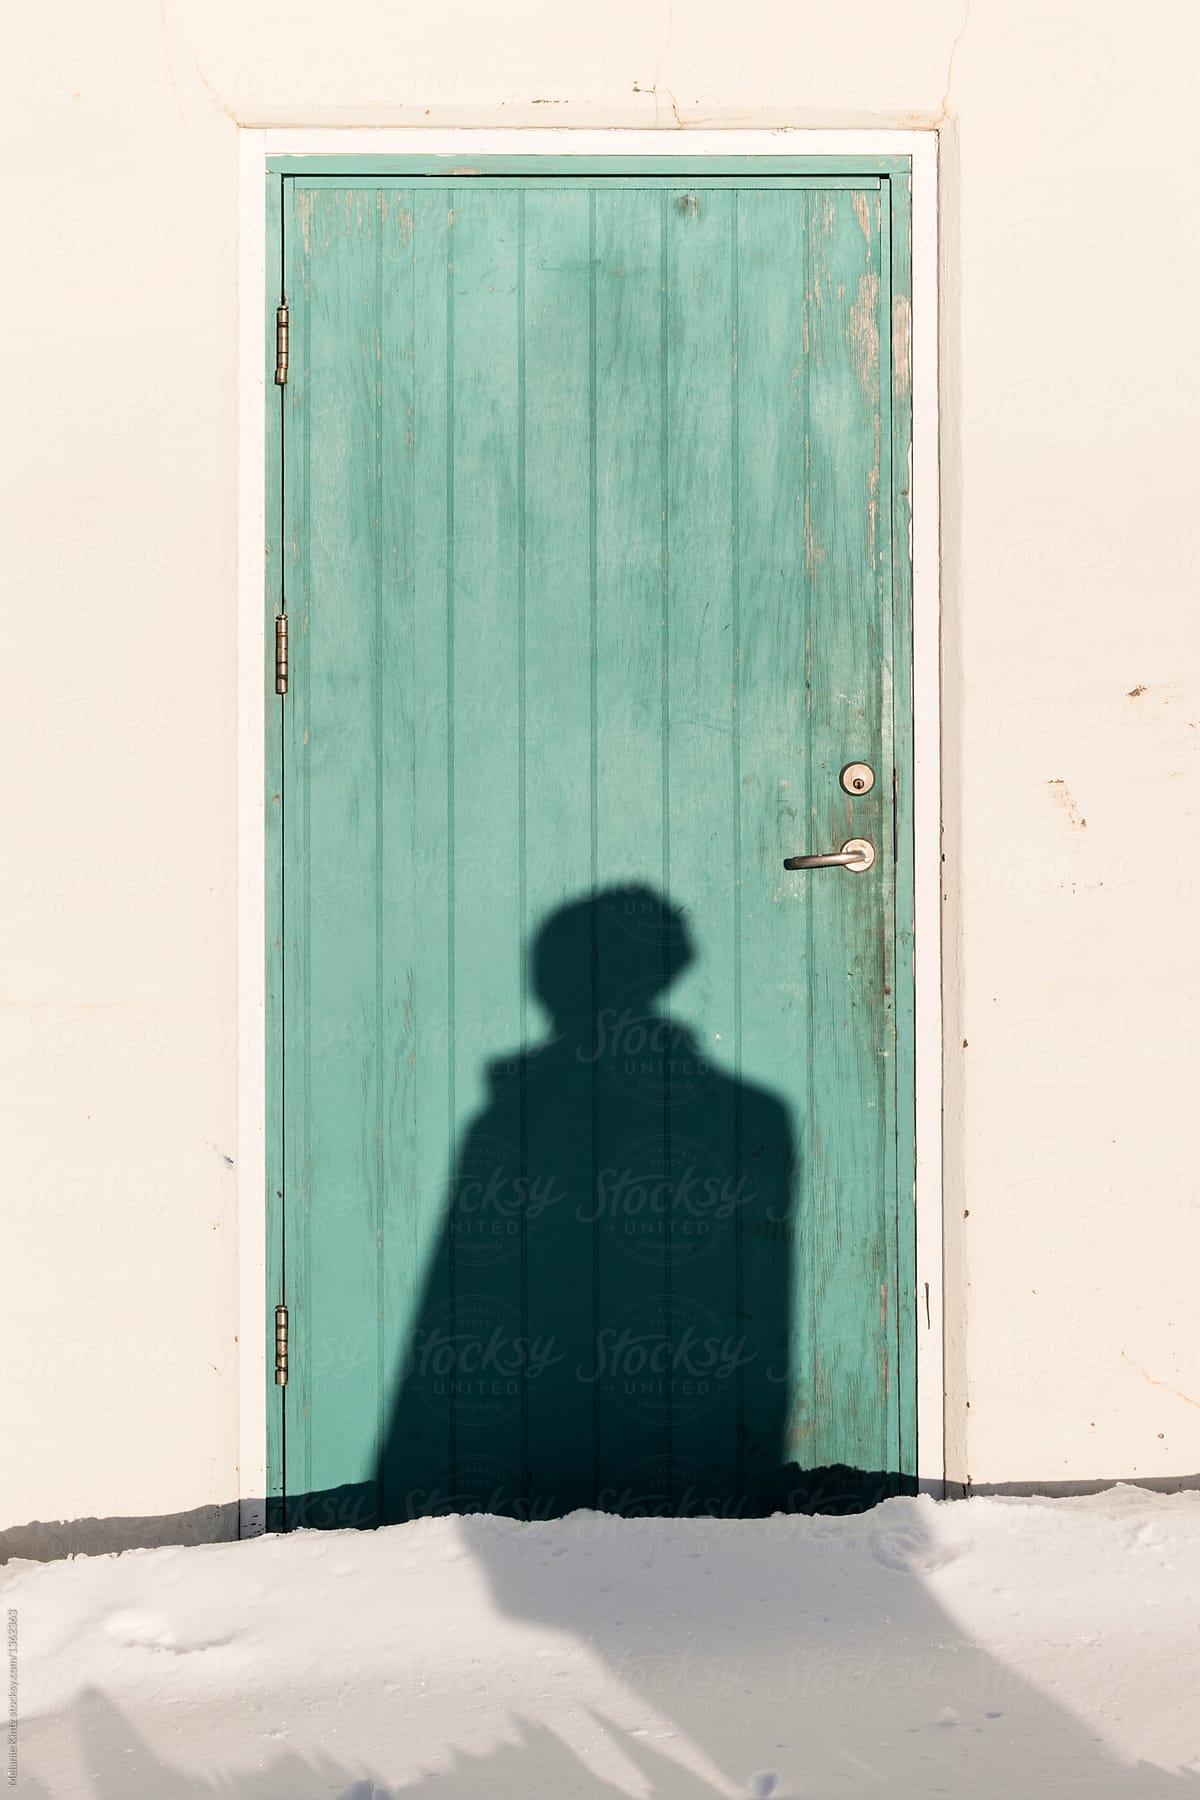 Shadow of a person falls onto a teal wooden door